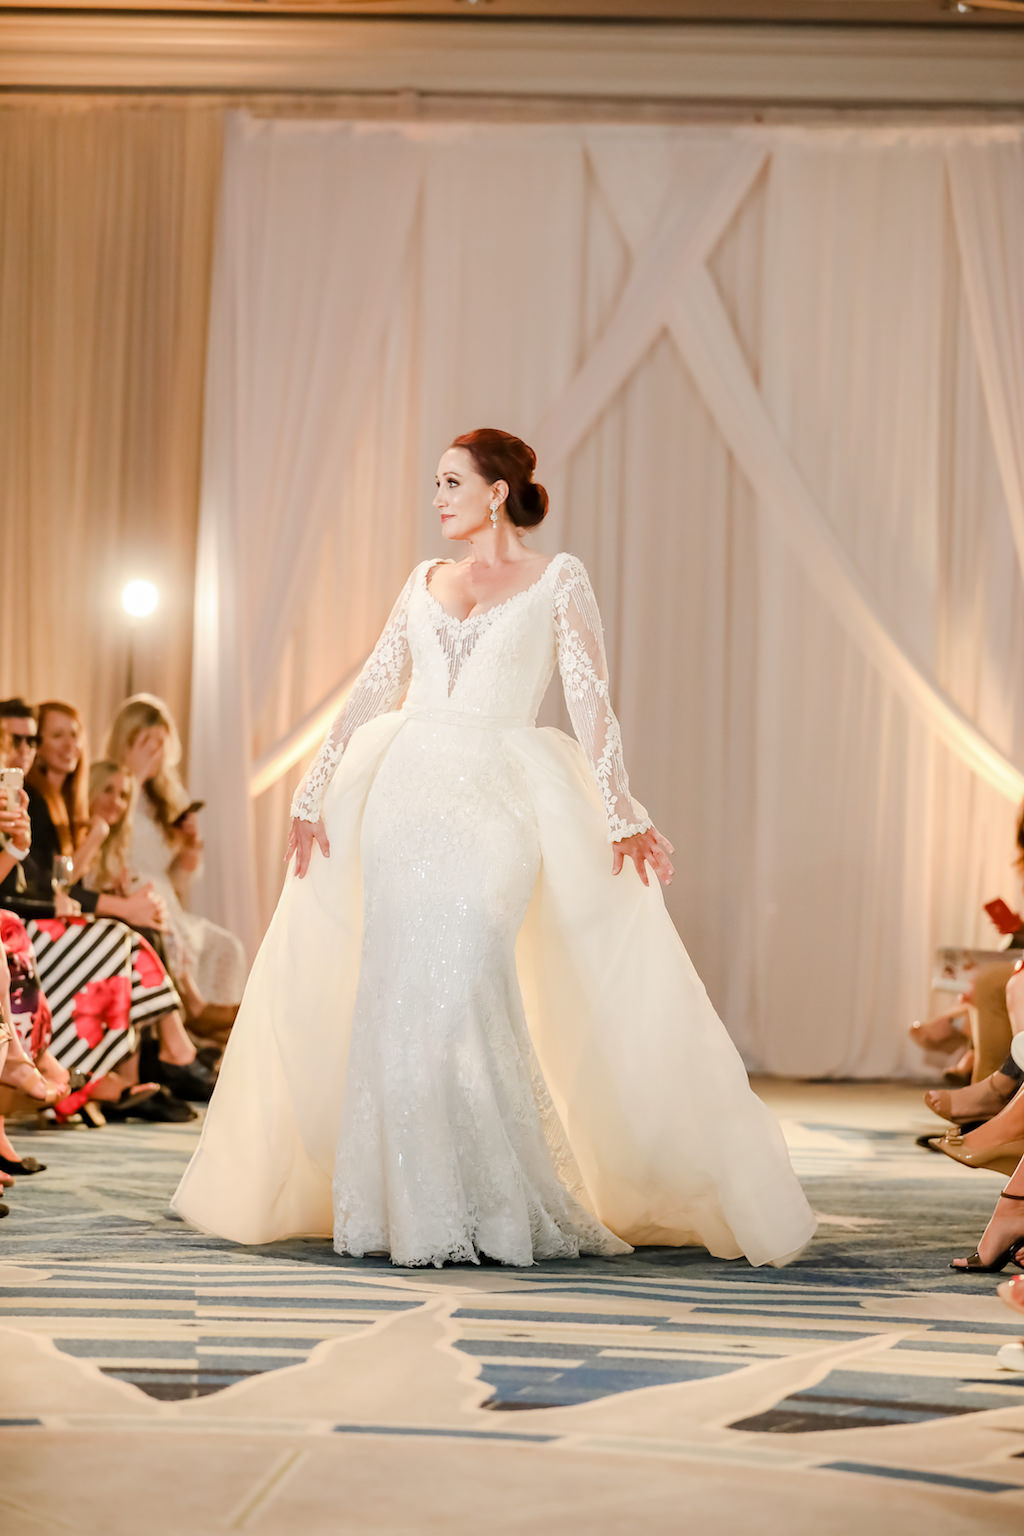 Extravagant, White Fit-and-Flare Wedding Dress, Full Tule Skirt Overlay, Illusion Lace Sleeves | Designer Matthew Christopher | Truly Forever Bridal | The Ritz Carlton Sarasota | Planner NK Weddings